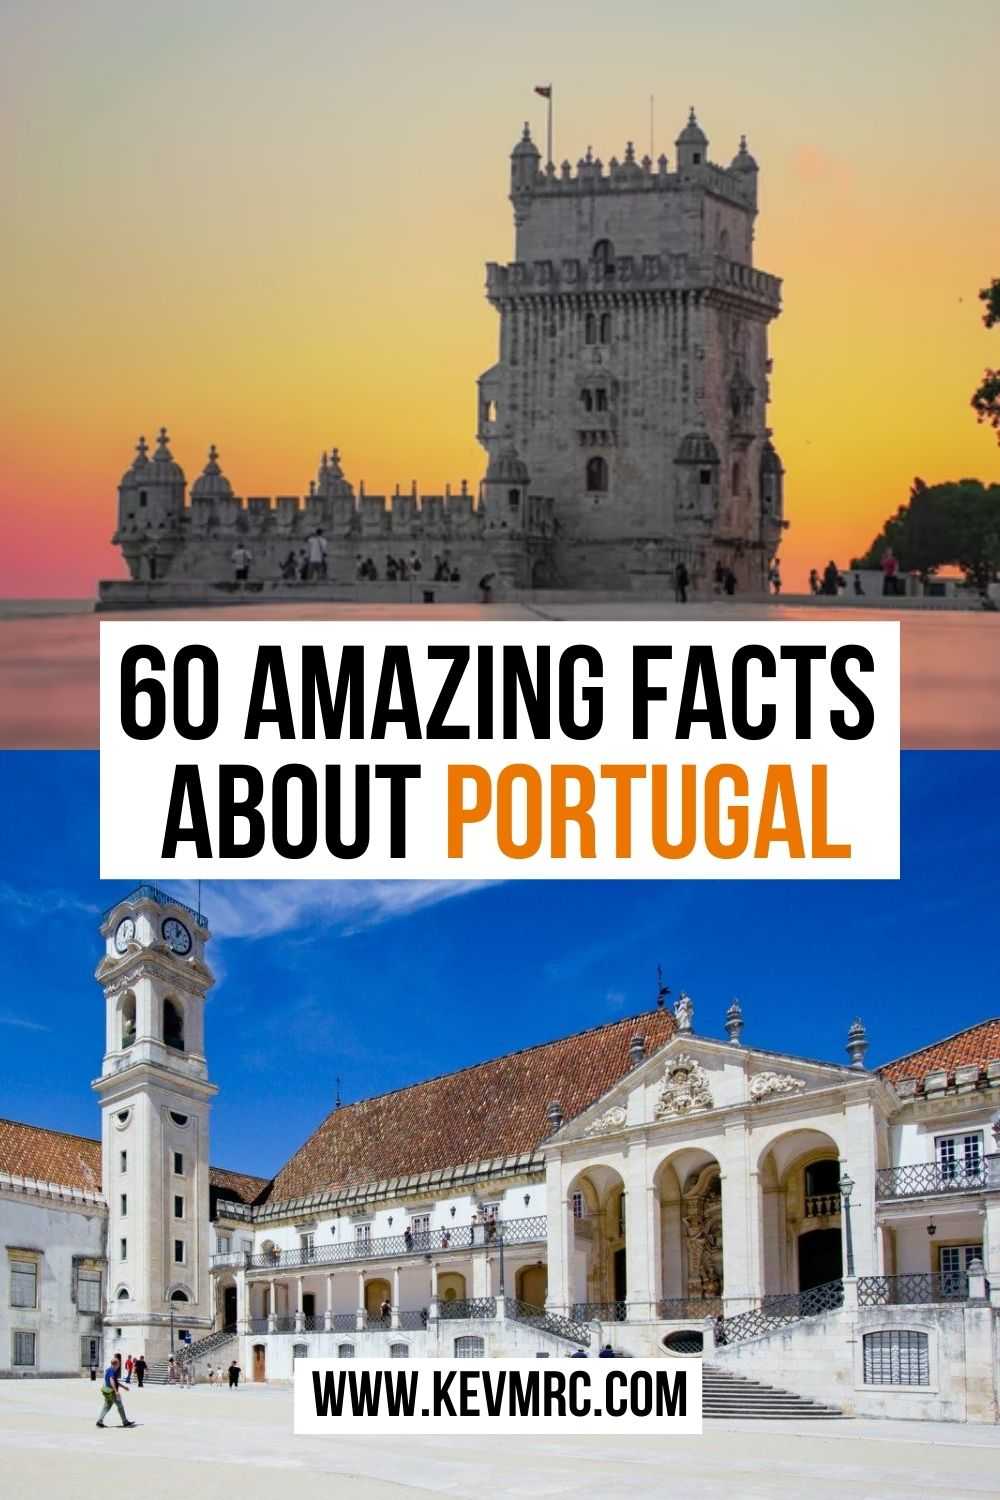 Lisbon, the capital city, as well as Porto and the Algarve region are among the must-see places in Portugal. In addition to its beautiful cities and beaches, Portugal also has a perfect climate all year round and tasty food specialties that drive the crowds. Discover no less than 60 interesting facts about Portugal on this post. #portugalfacts 